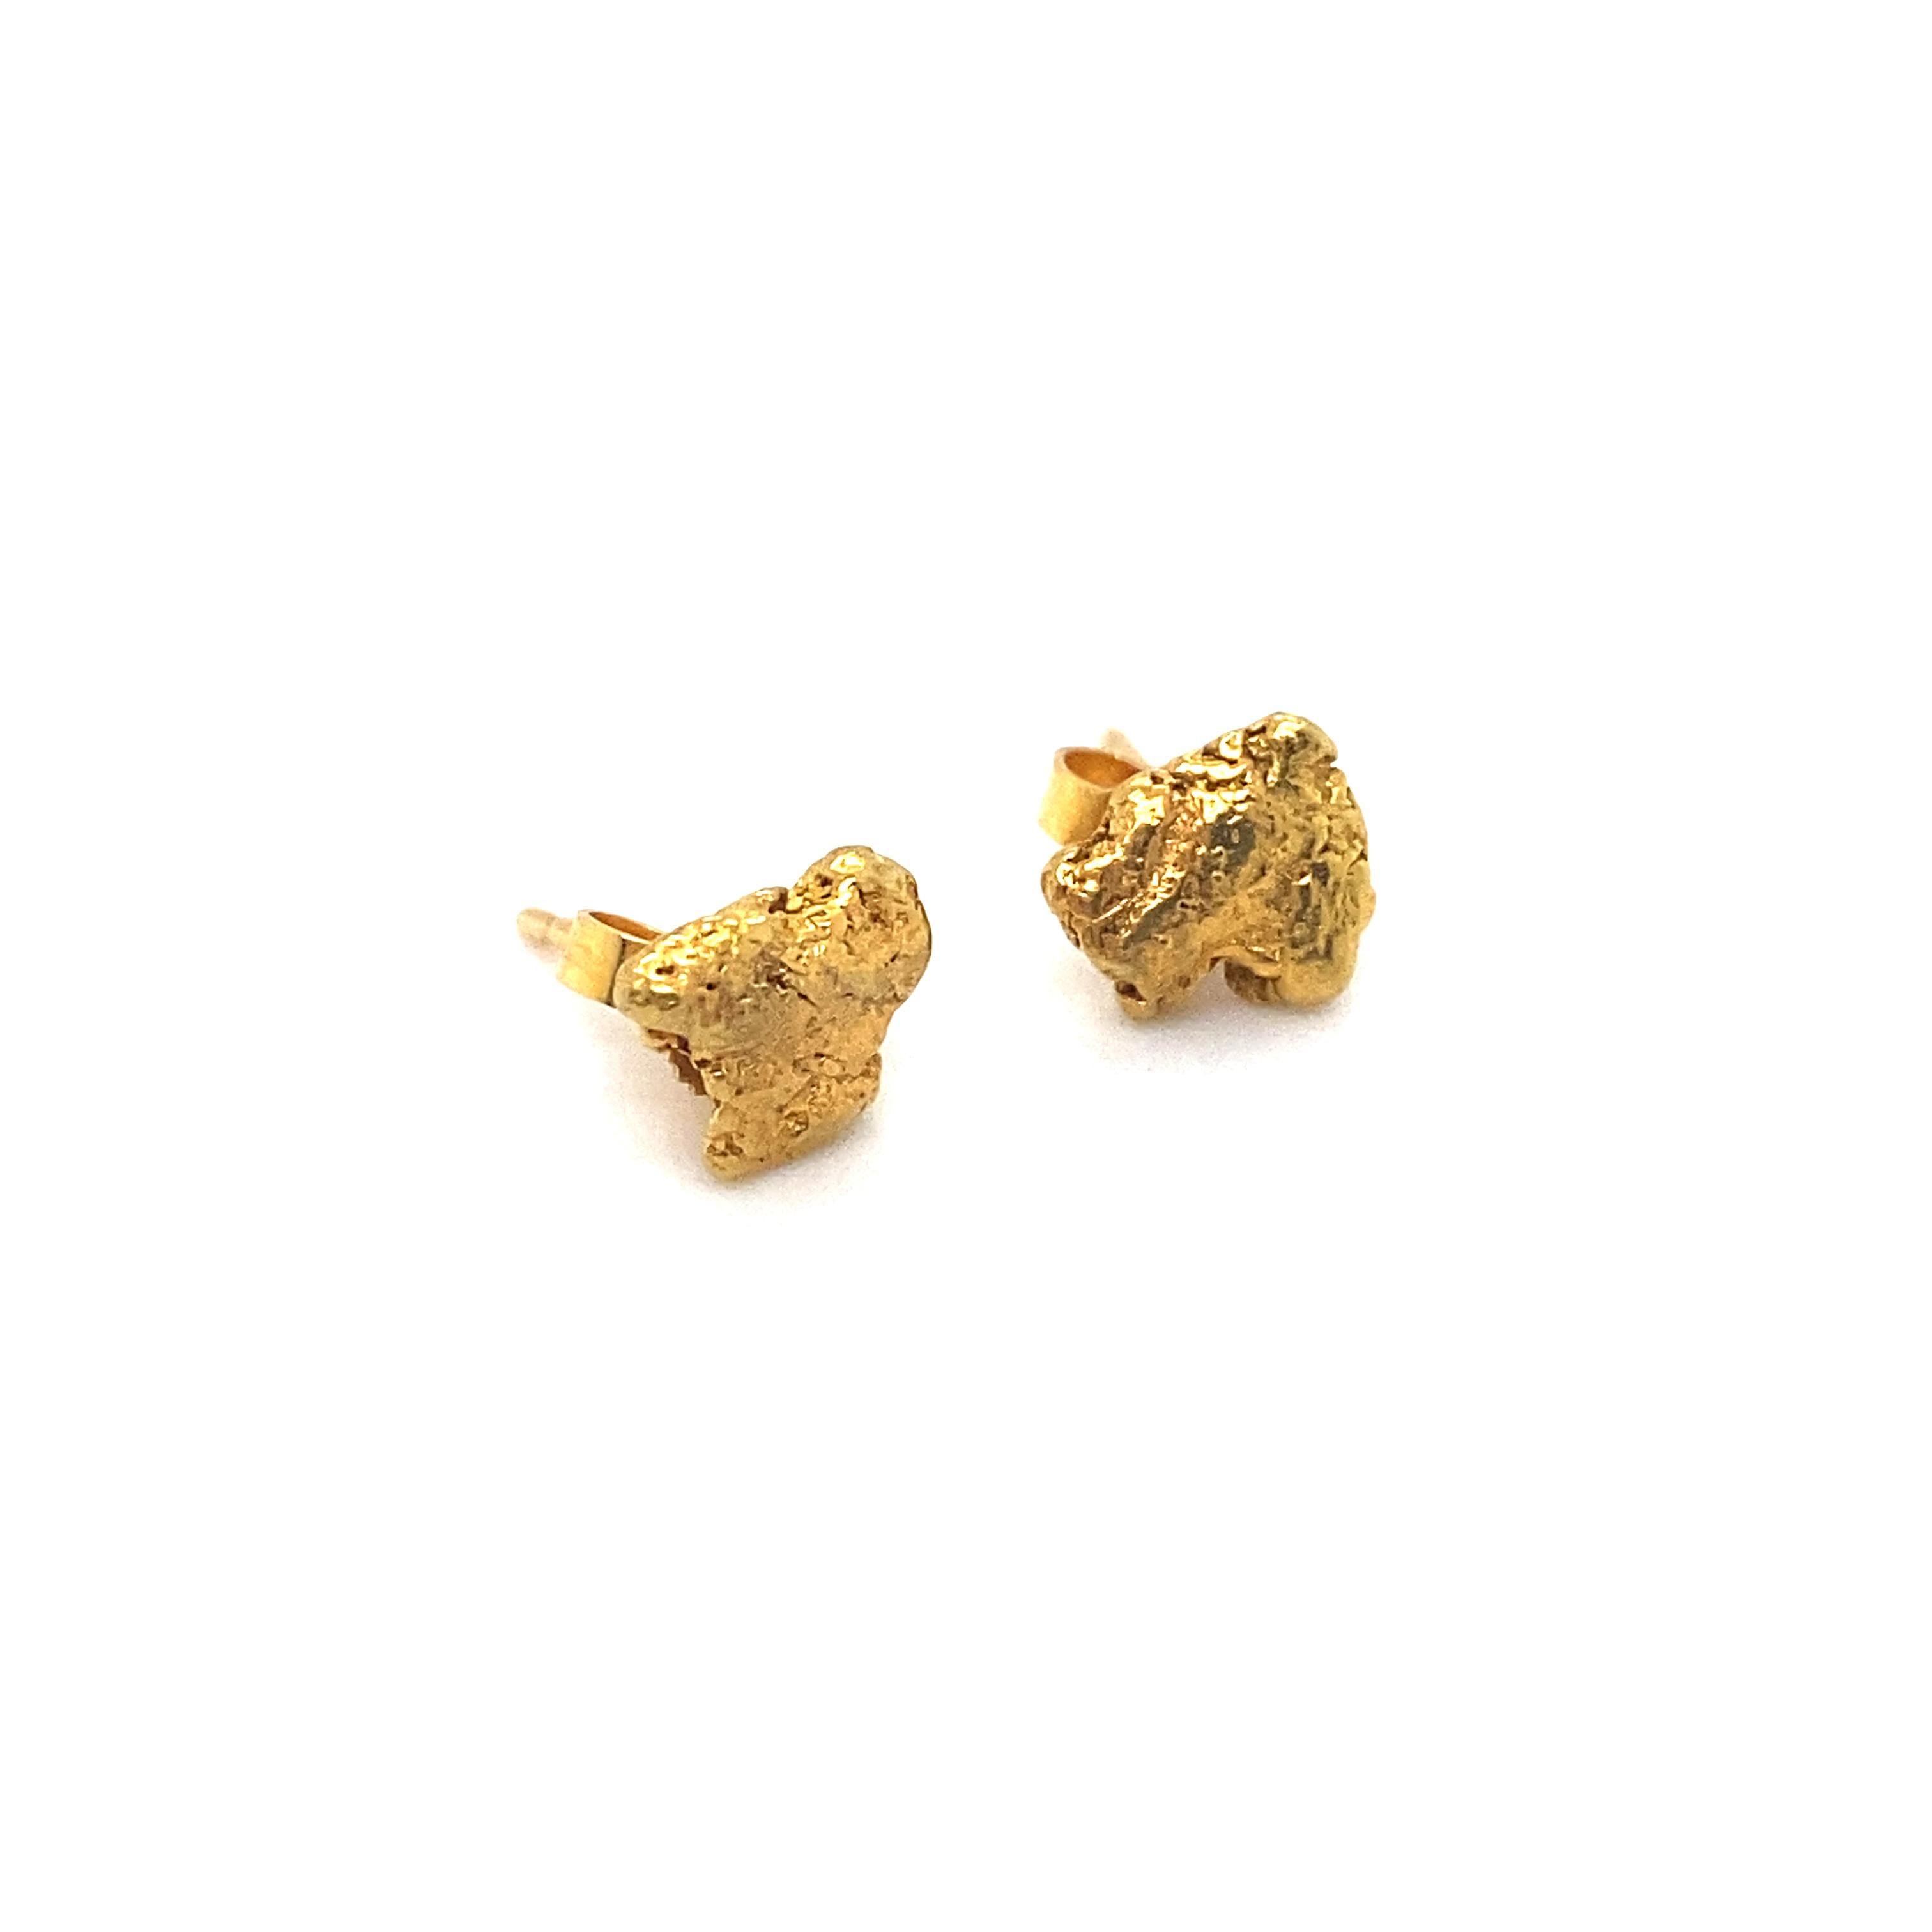 I don't know why, but I can't stay away from the nuggets!! To me, it's such a raw and organic feel - a great everyday or statement piece! Crafted in 24K Yellow Gold, these vintage earrings are classic raw nuggets of gold! These studs are perfect